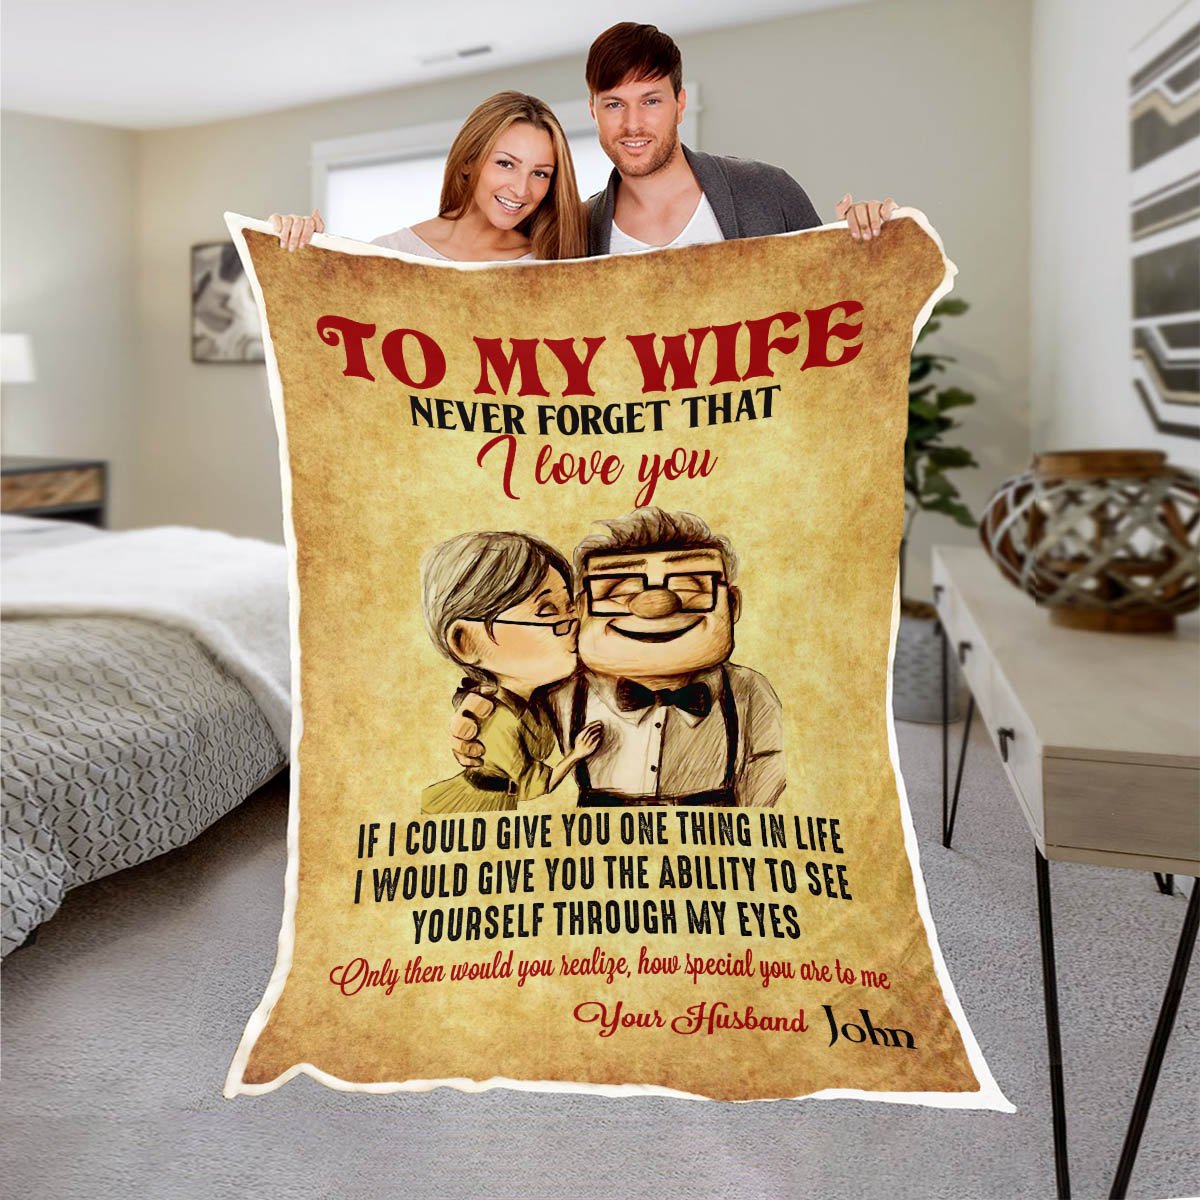 To my wife never forget that i love you blanket 3